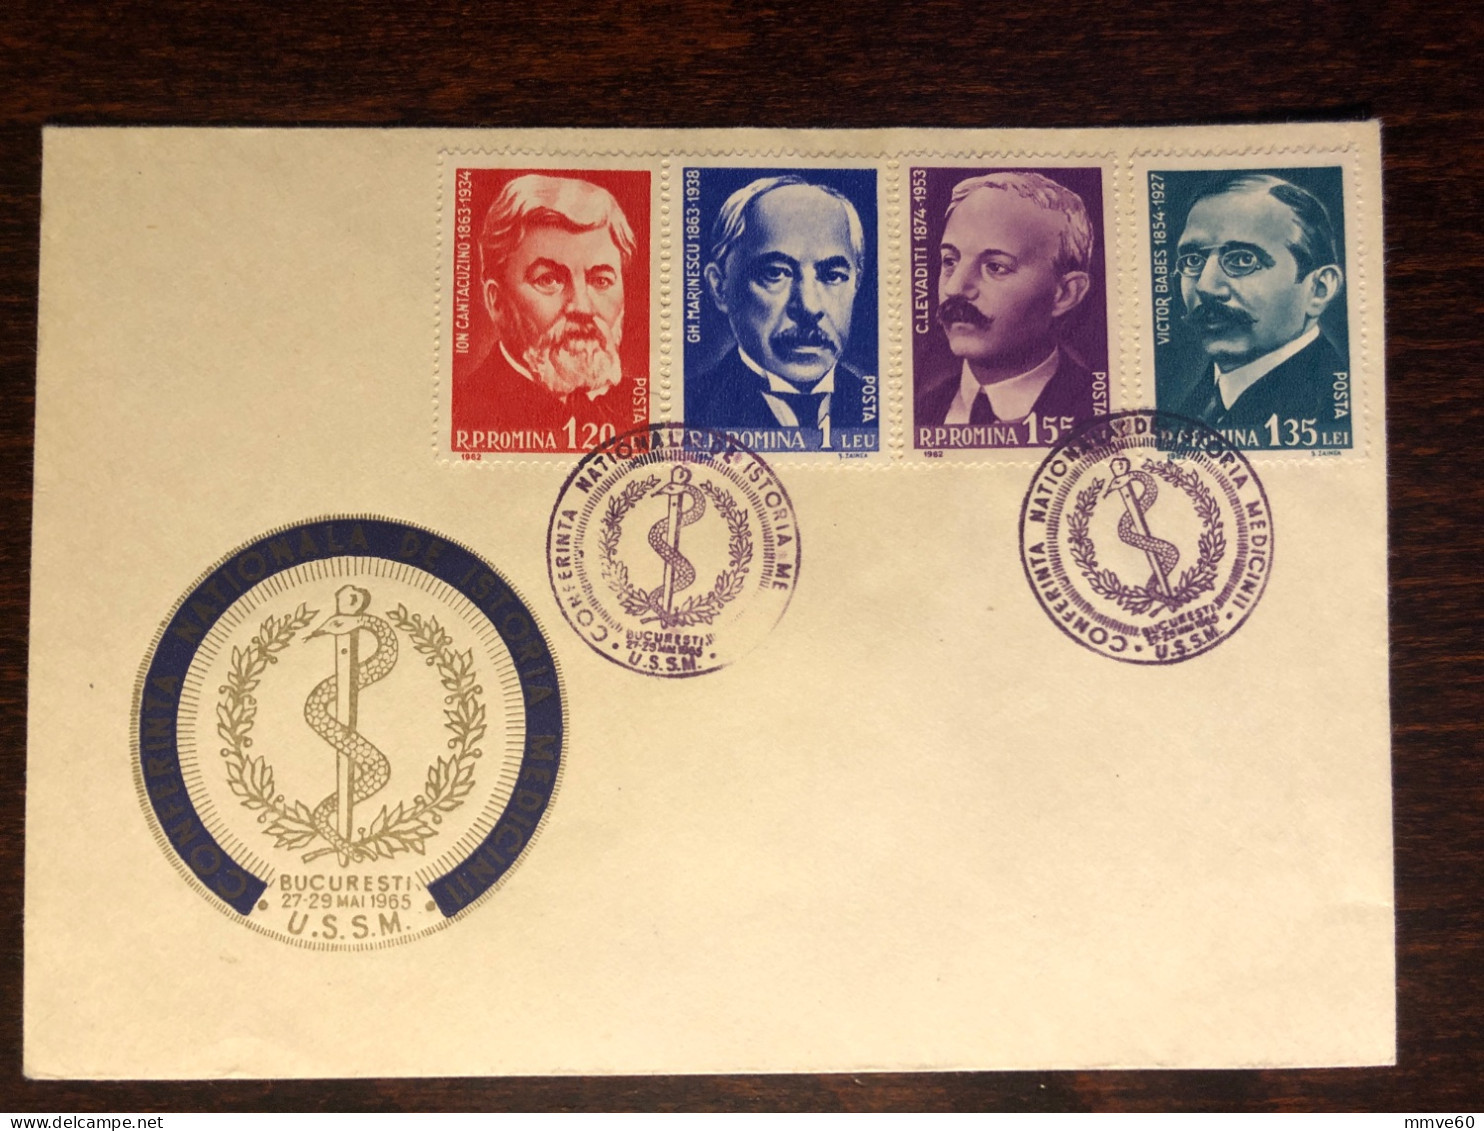 ROMANIA SPECIAL COVER AND CANCELLATION 1965 YEAR FAMOUS DOCTORS HISTORY OF MEDICINE CONGRESS HEALTH MEDICINE STAMPS - FDC